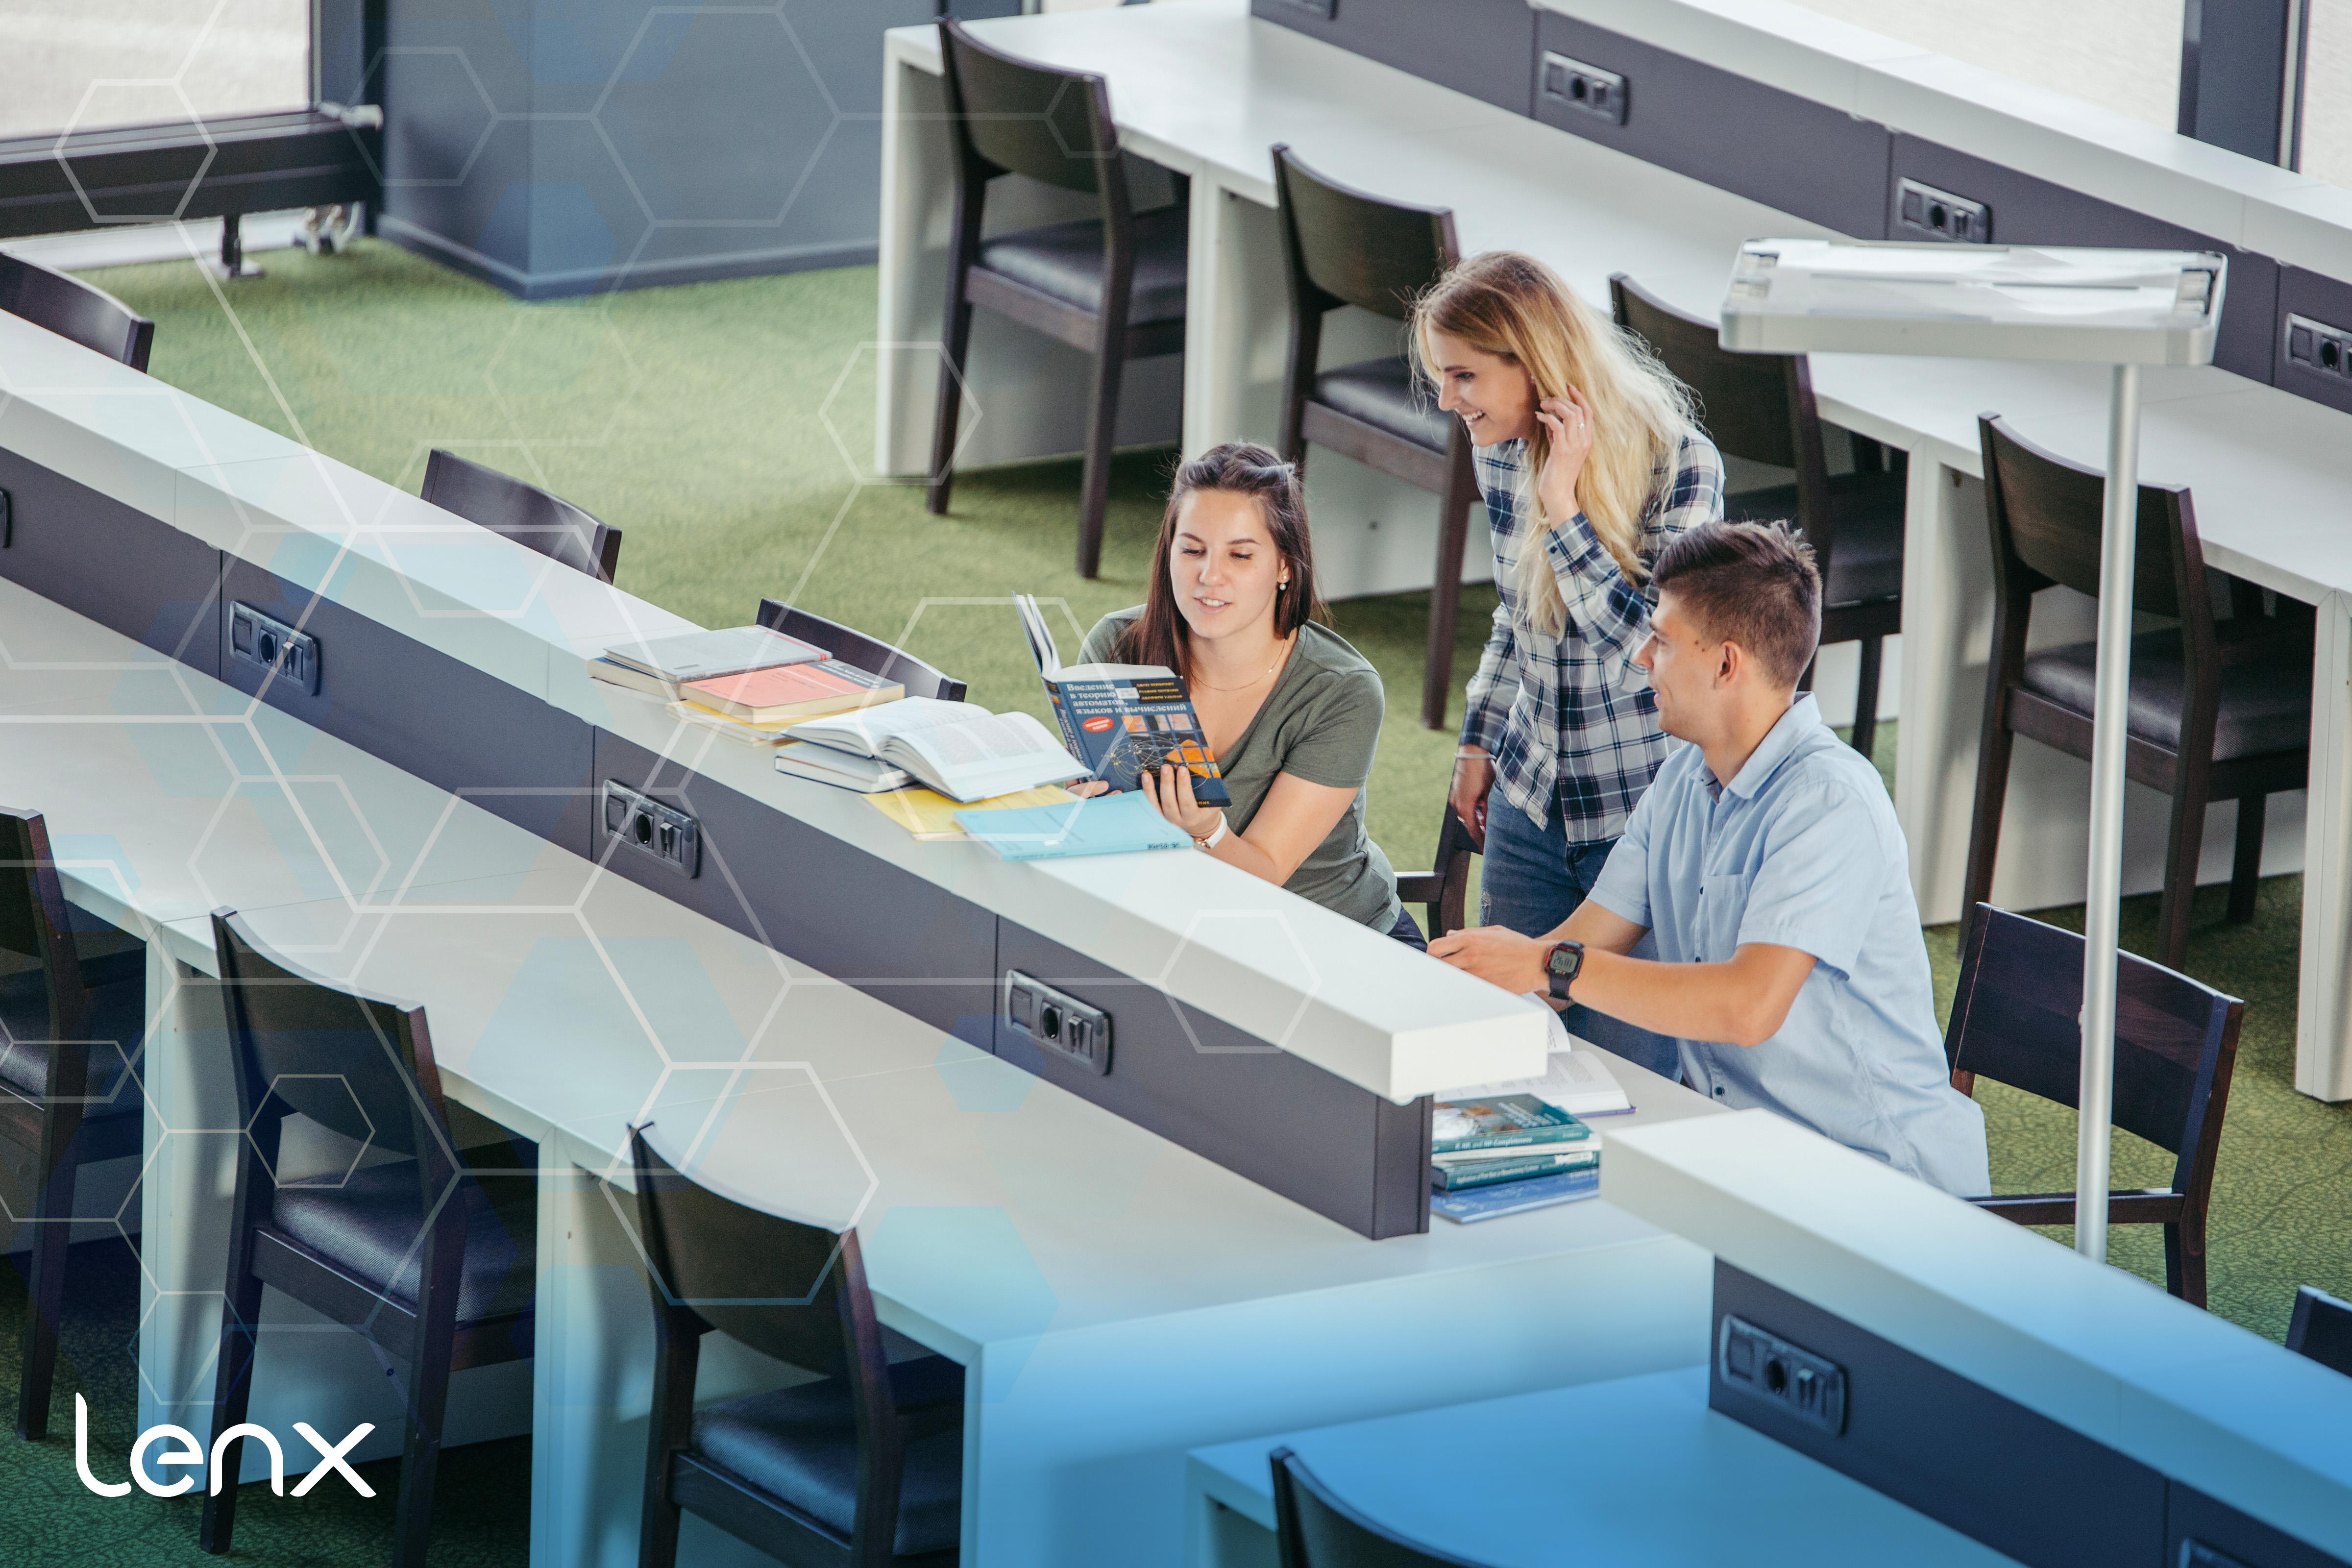 Ensuring Safety At Technical Colleges With AI Security and Active Shooter Detection